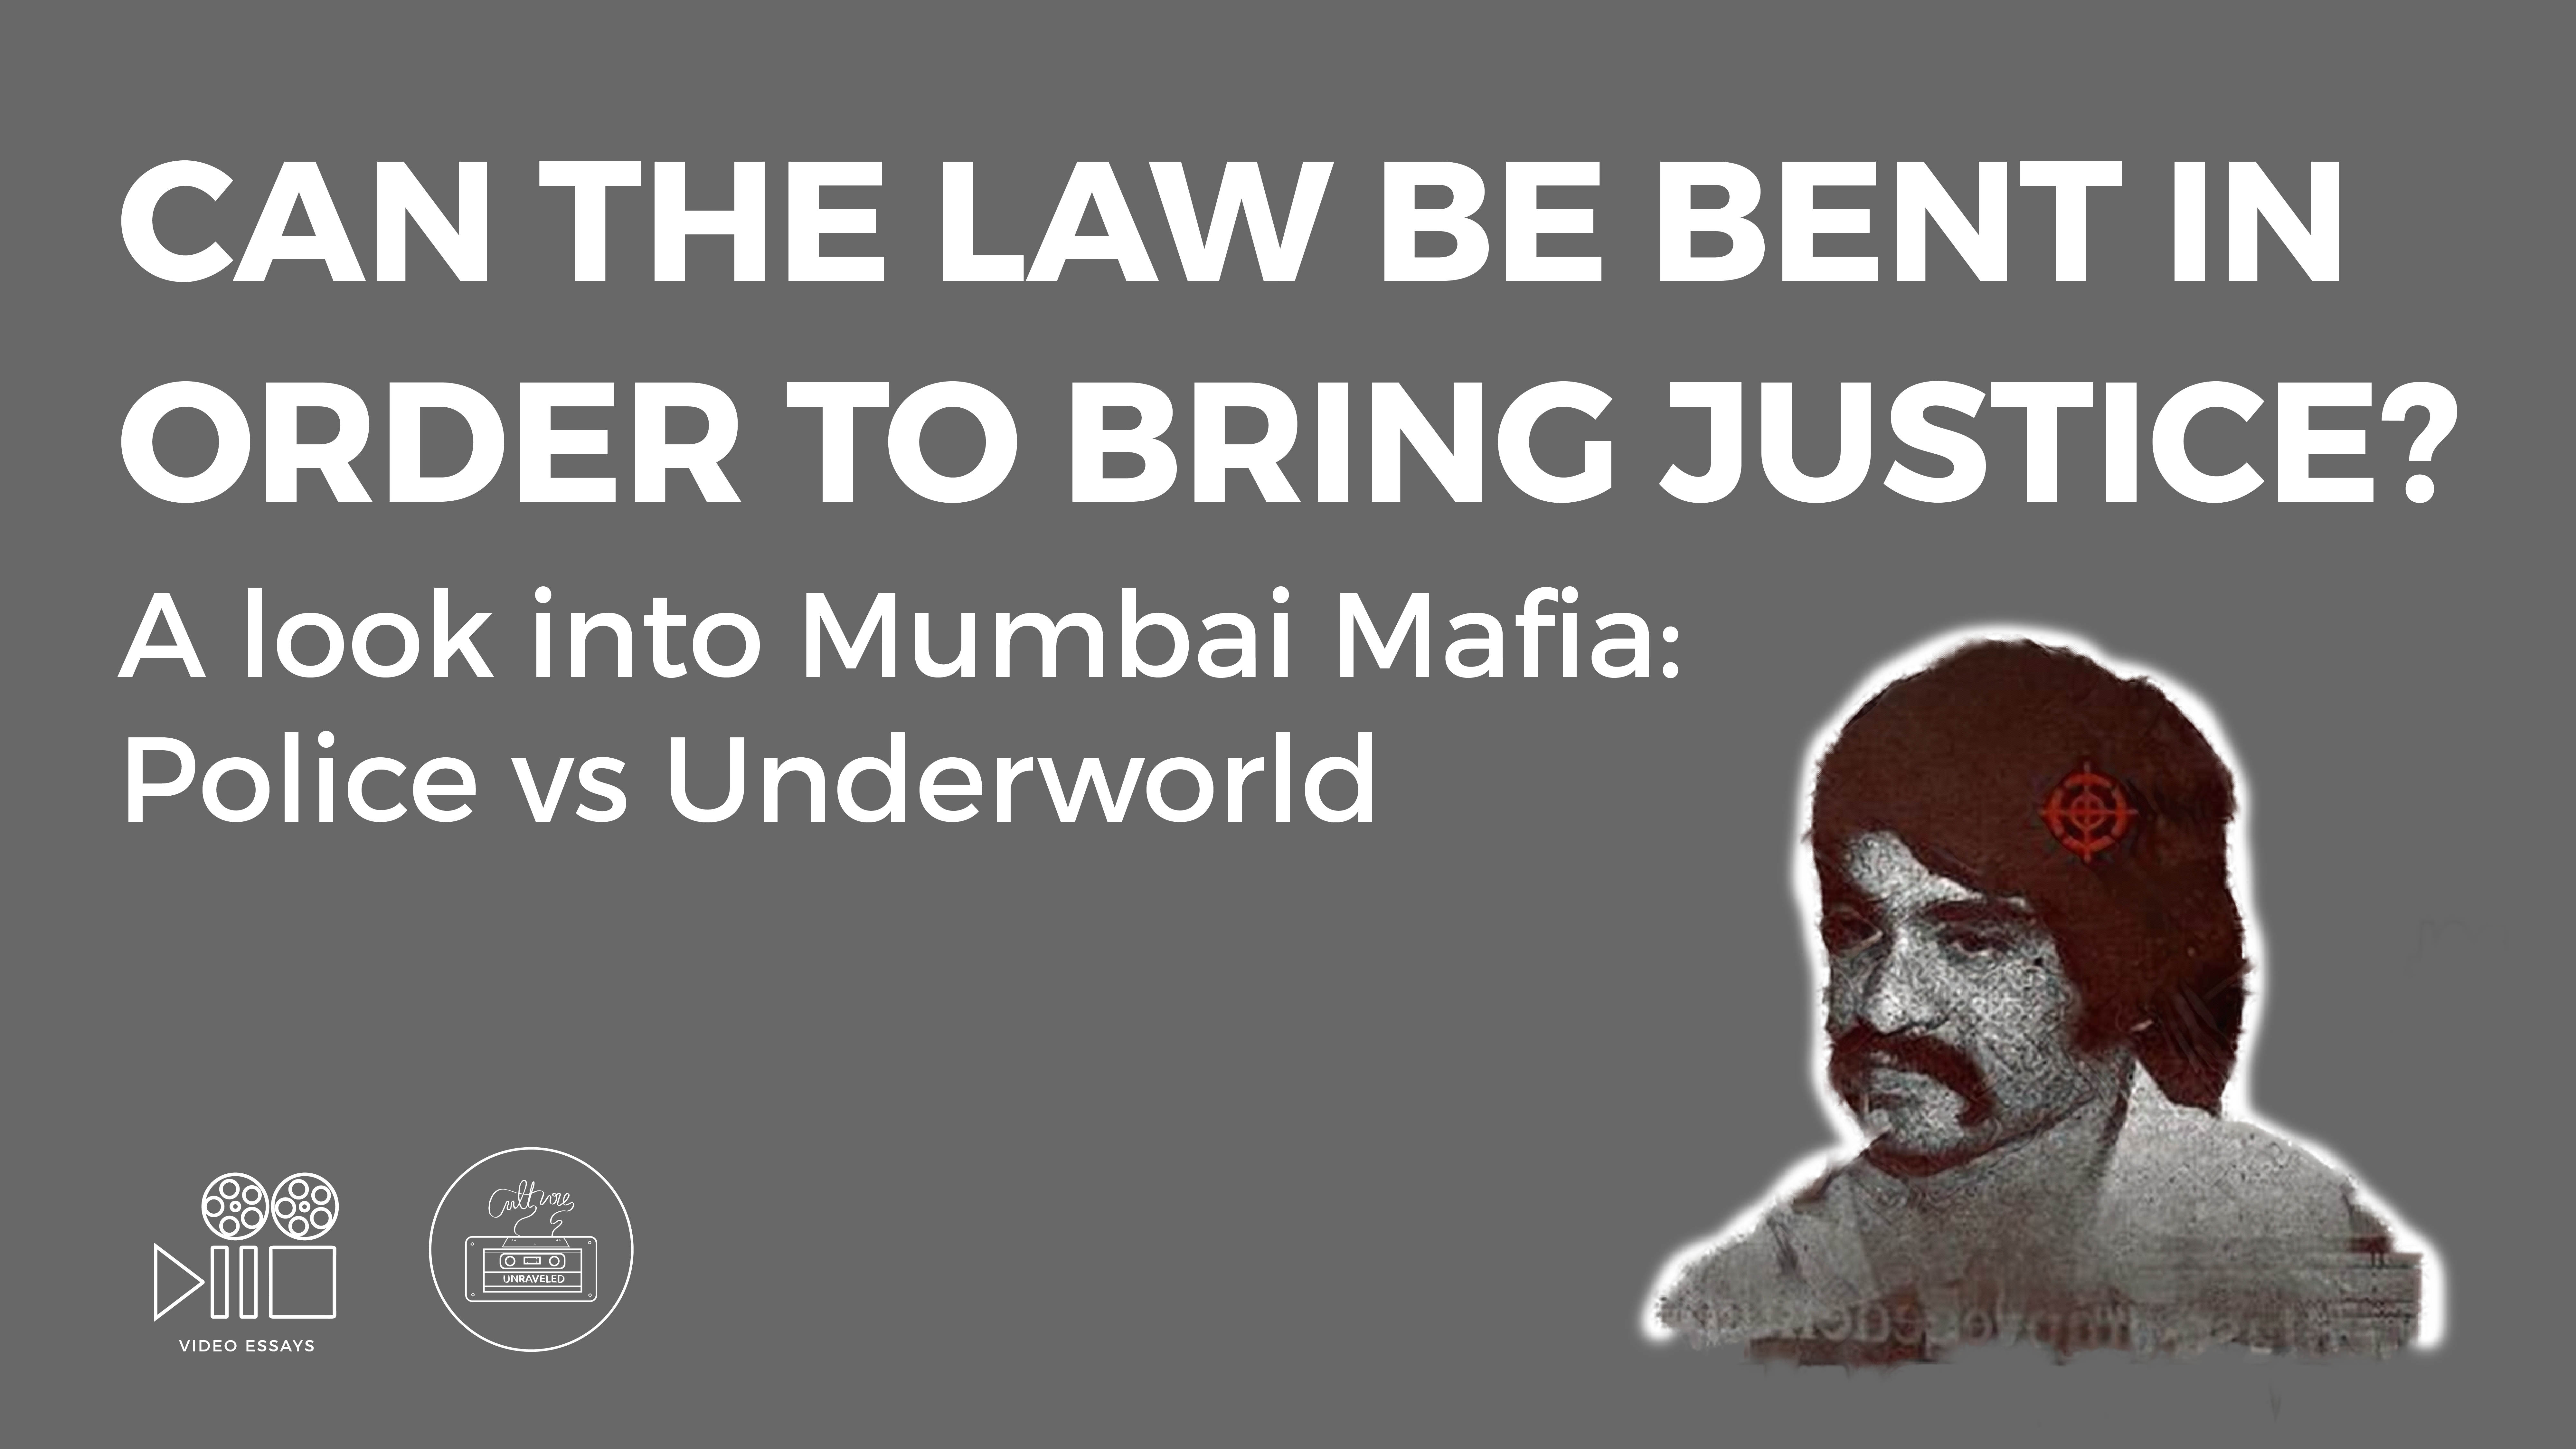 Can the Law be bent in order to bring Justice? A Look into Mumbai Mafia: Police vs Underworld